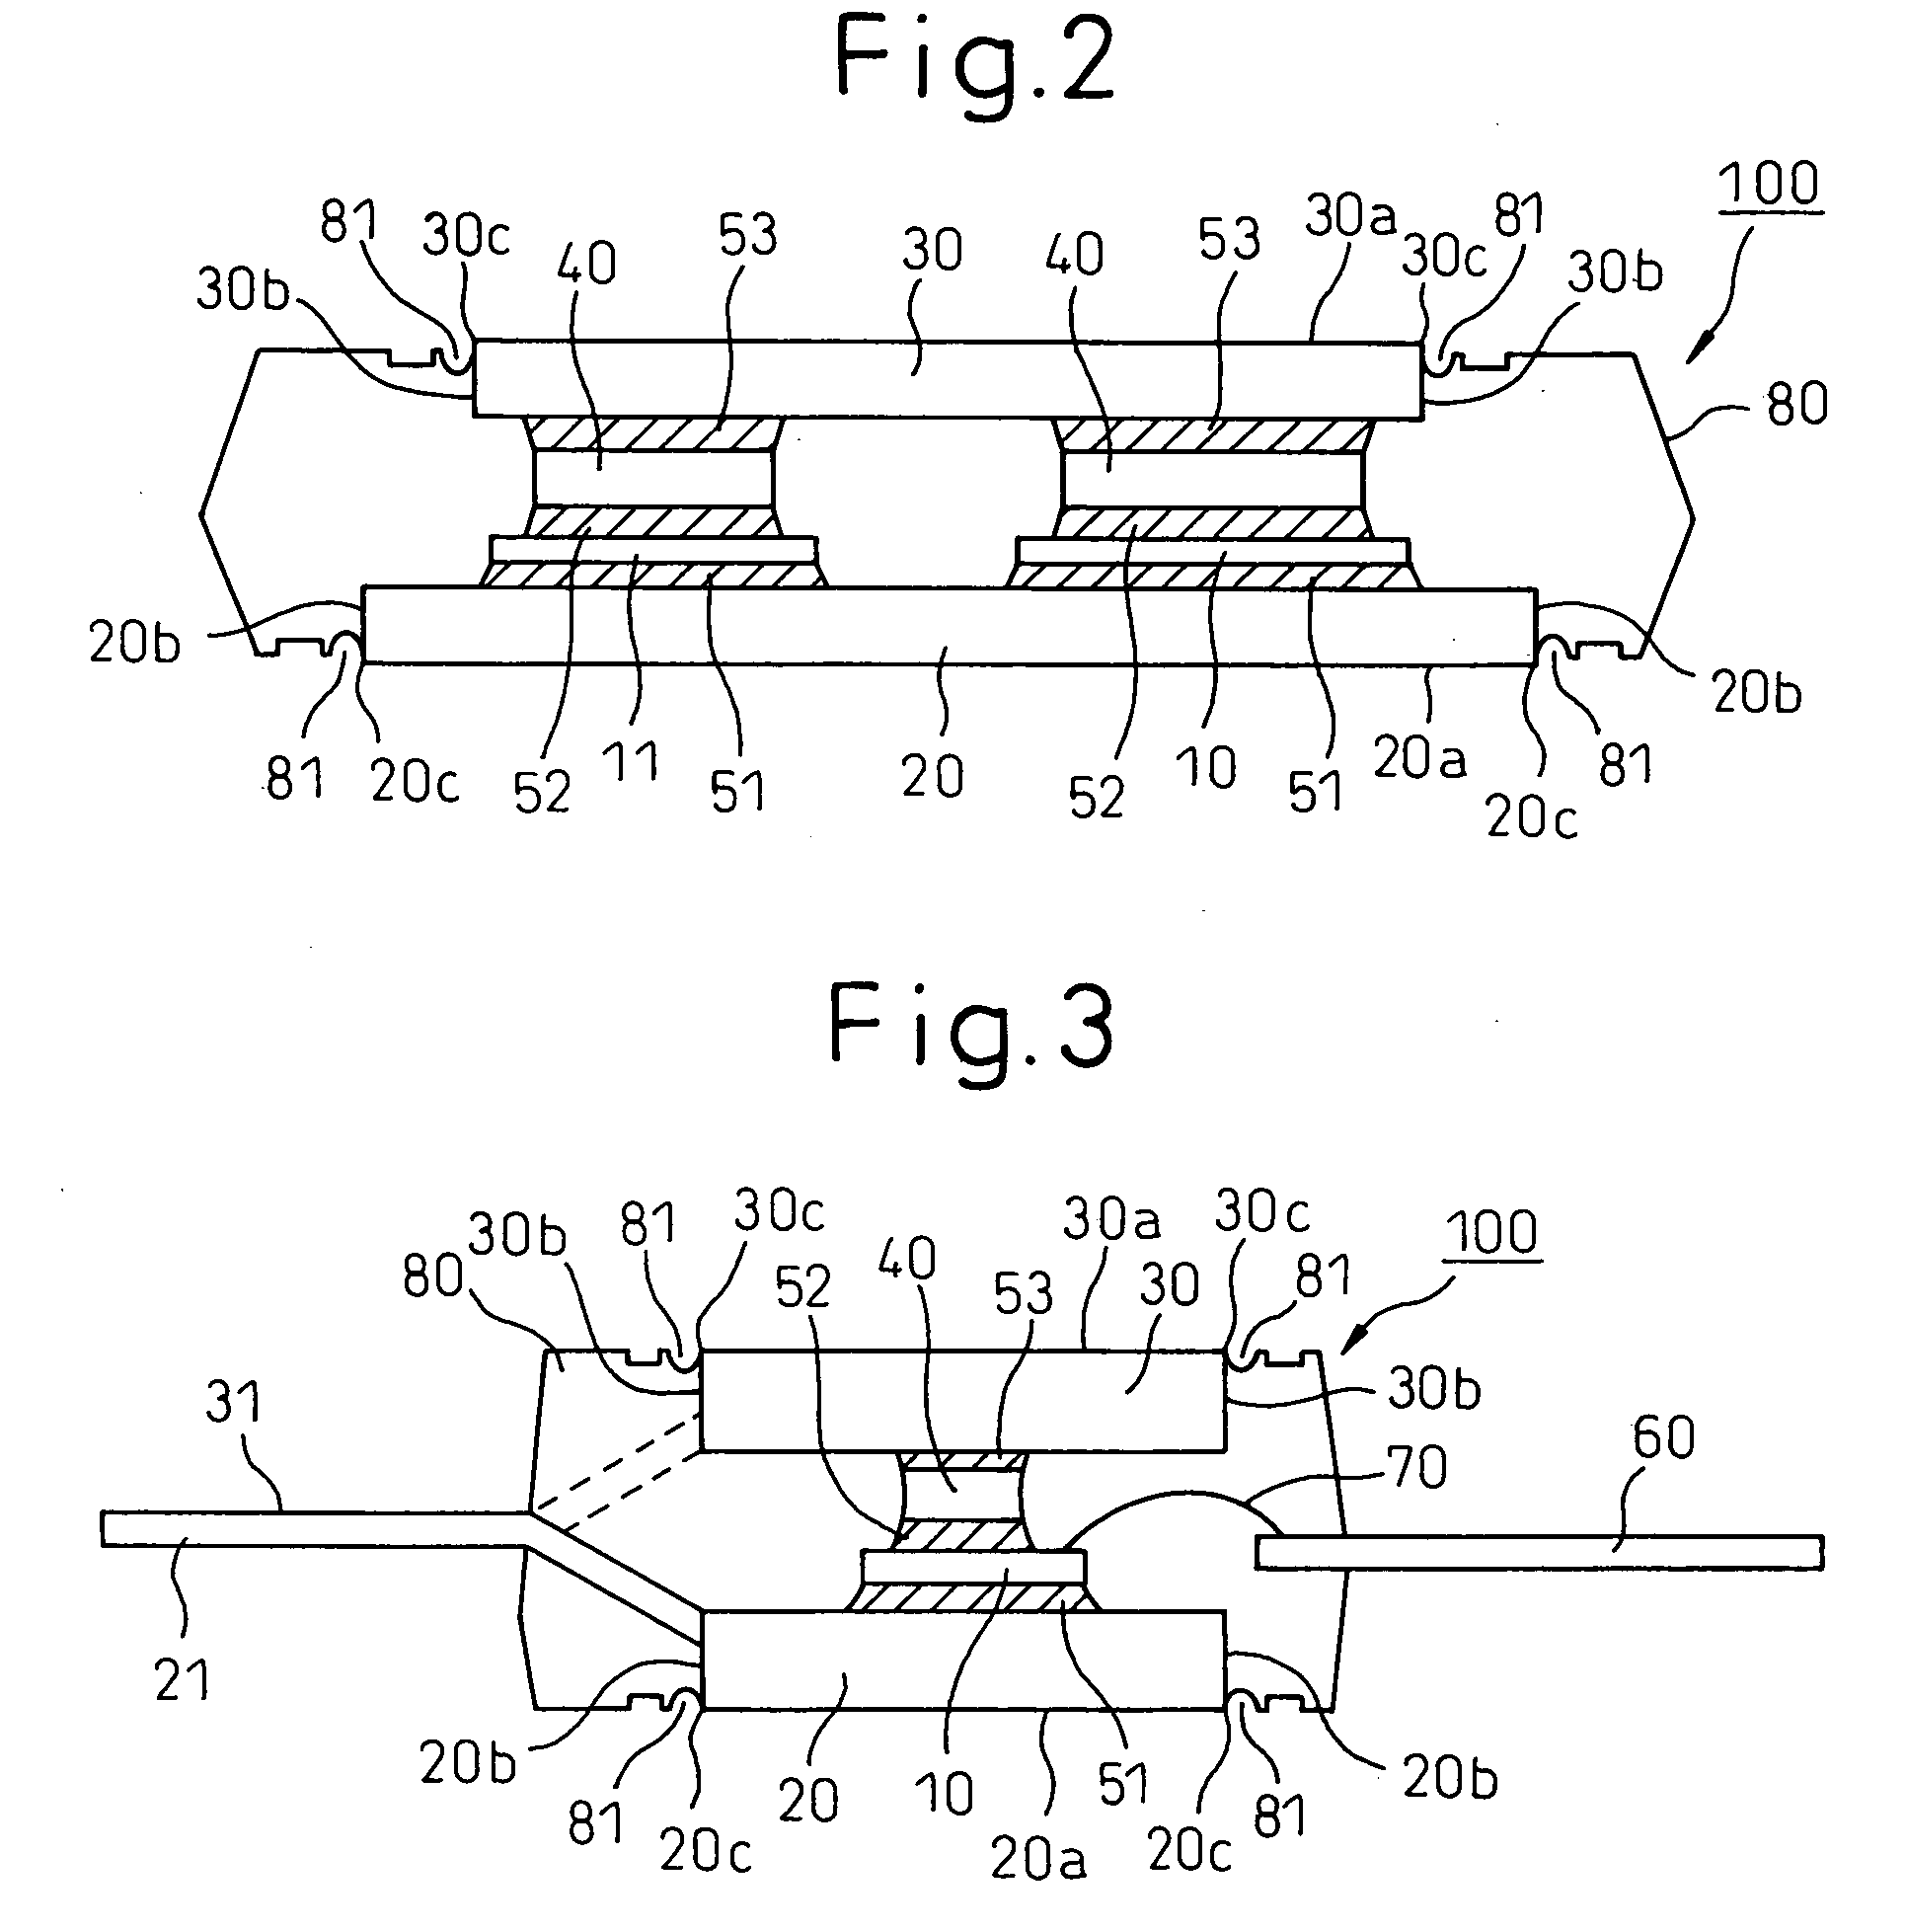 Semiconductor device, method and apparatus for fabricating the same